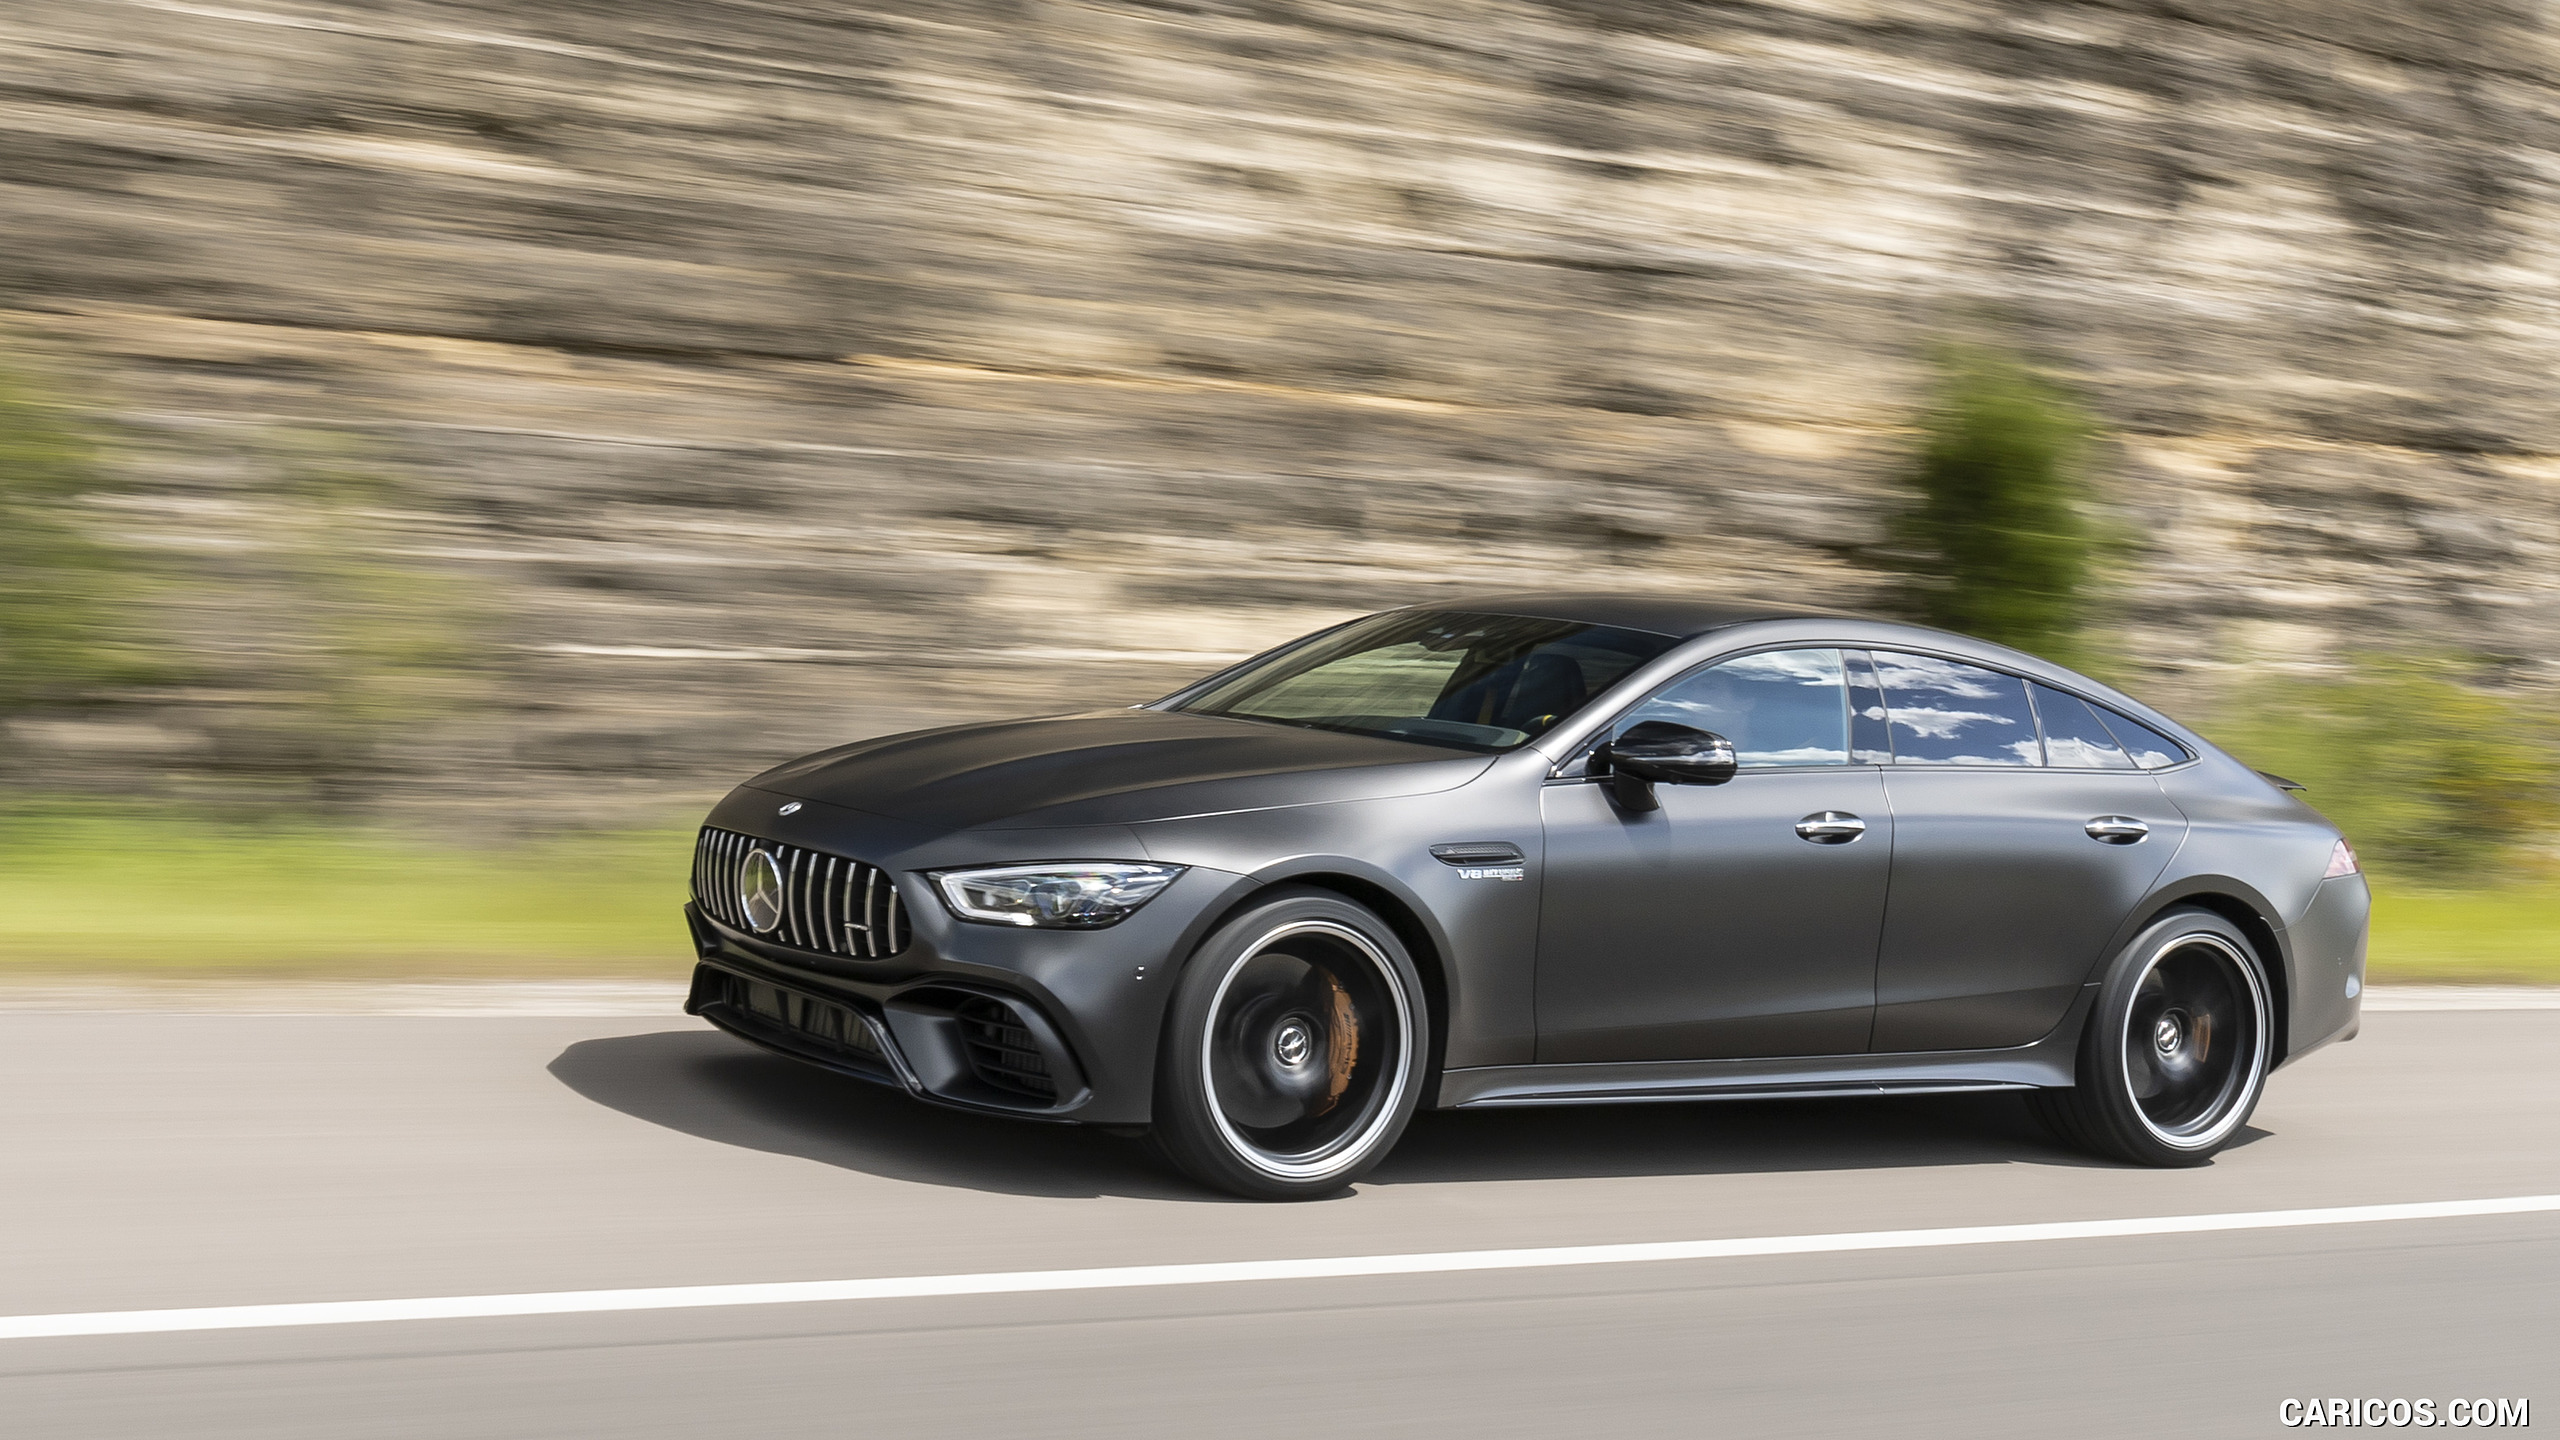 2019 Mercedes-AMG GT 63 S 4MATIC+ 4-Door Coupe - Side, #193 of 427